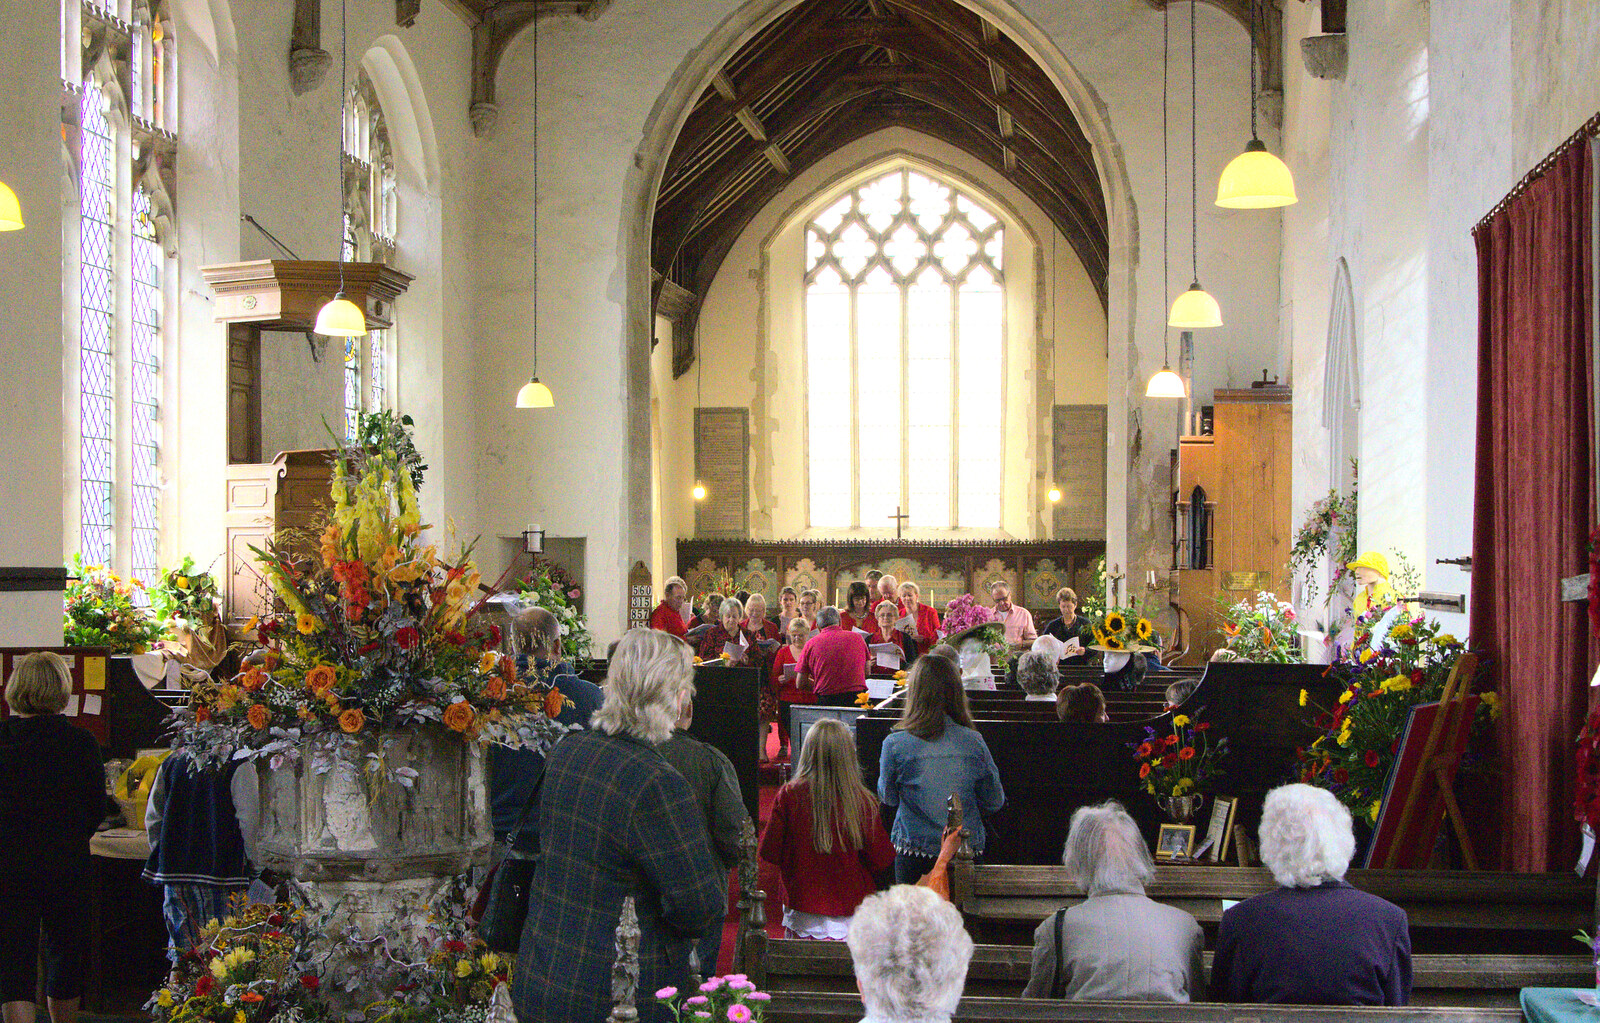 A view of the choir from the back of the church from The Oaksmere, and the Gislingham Flower Festival, Suffolk - 24th August 2014